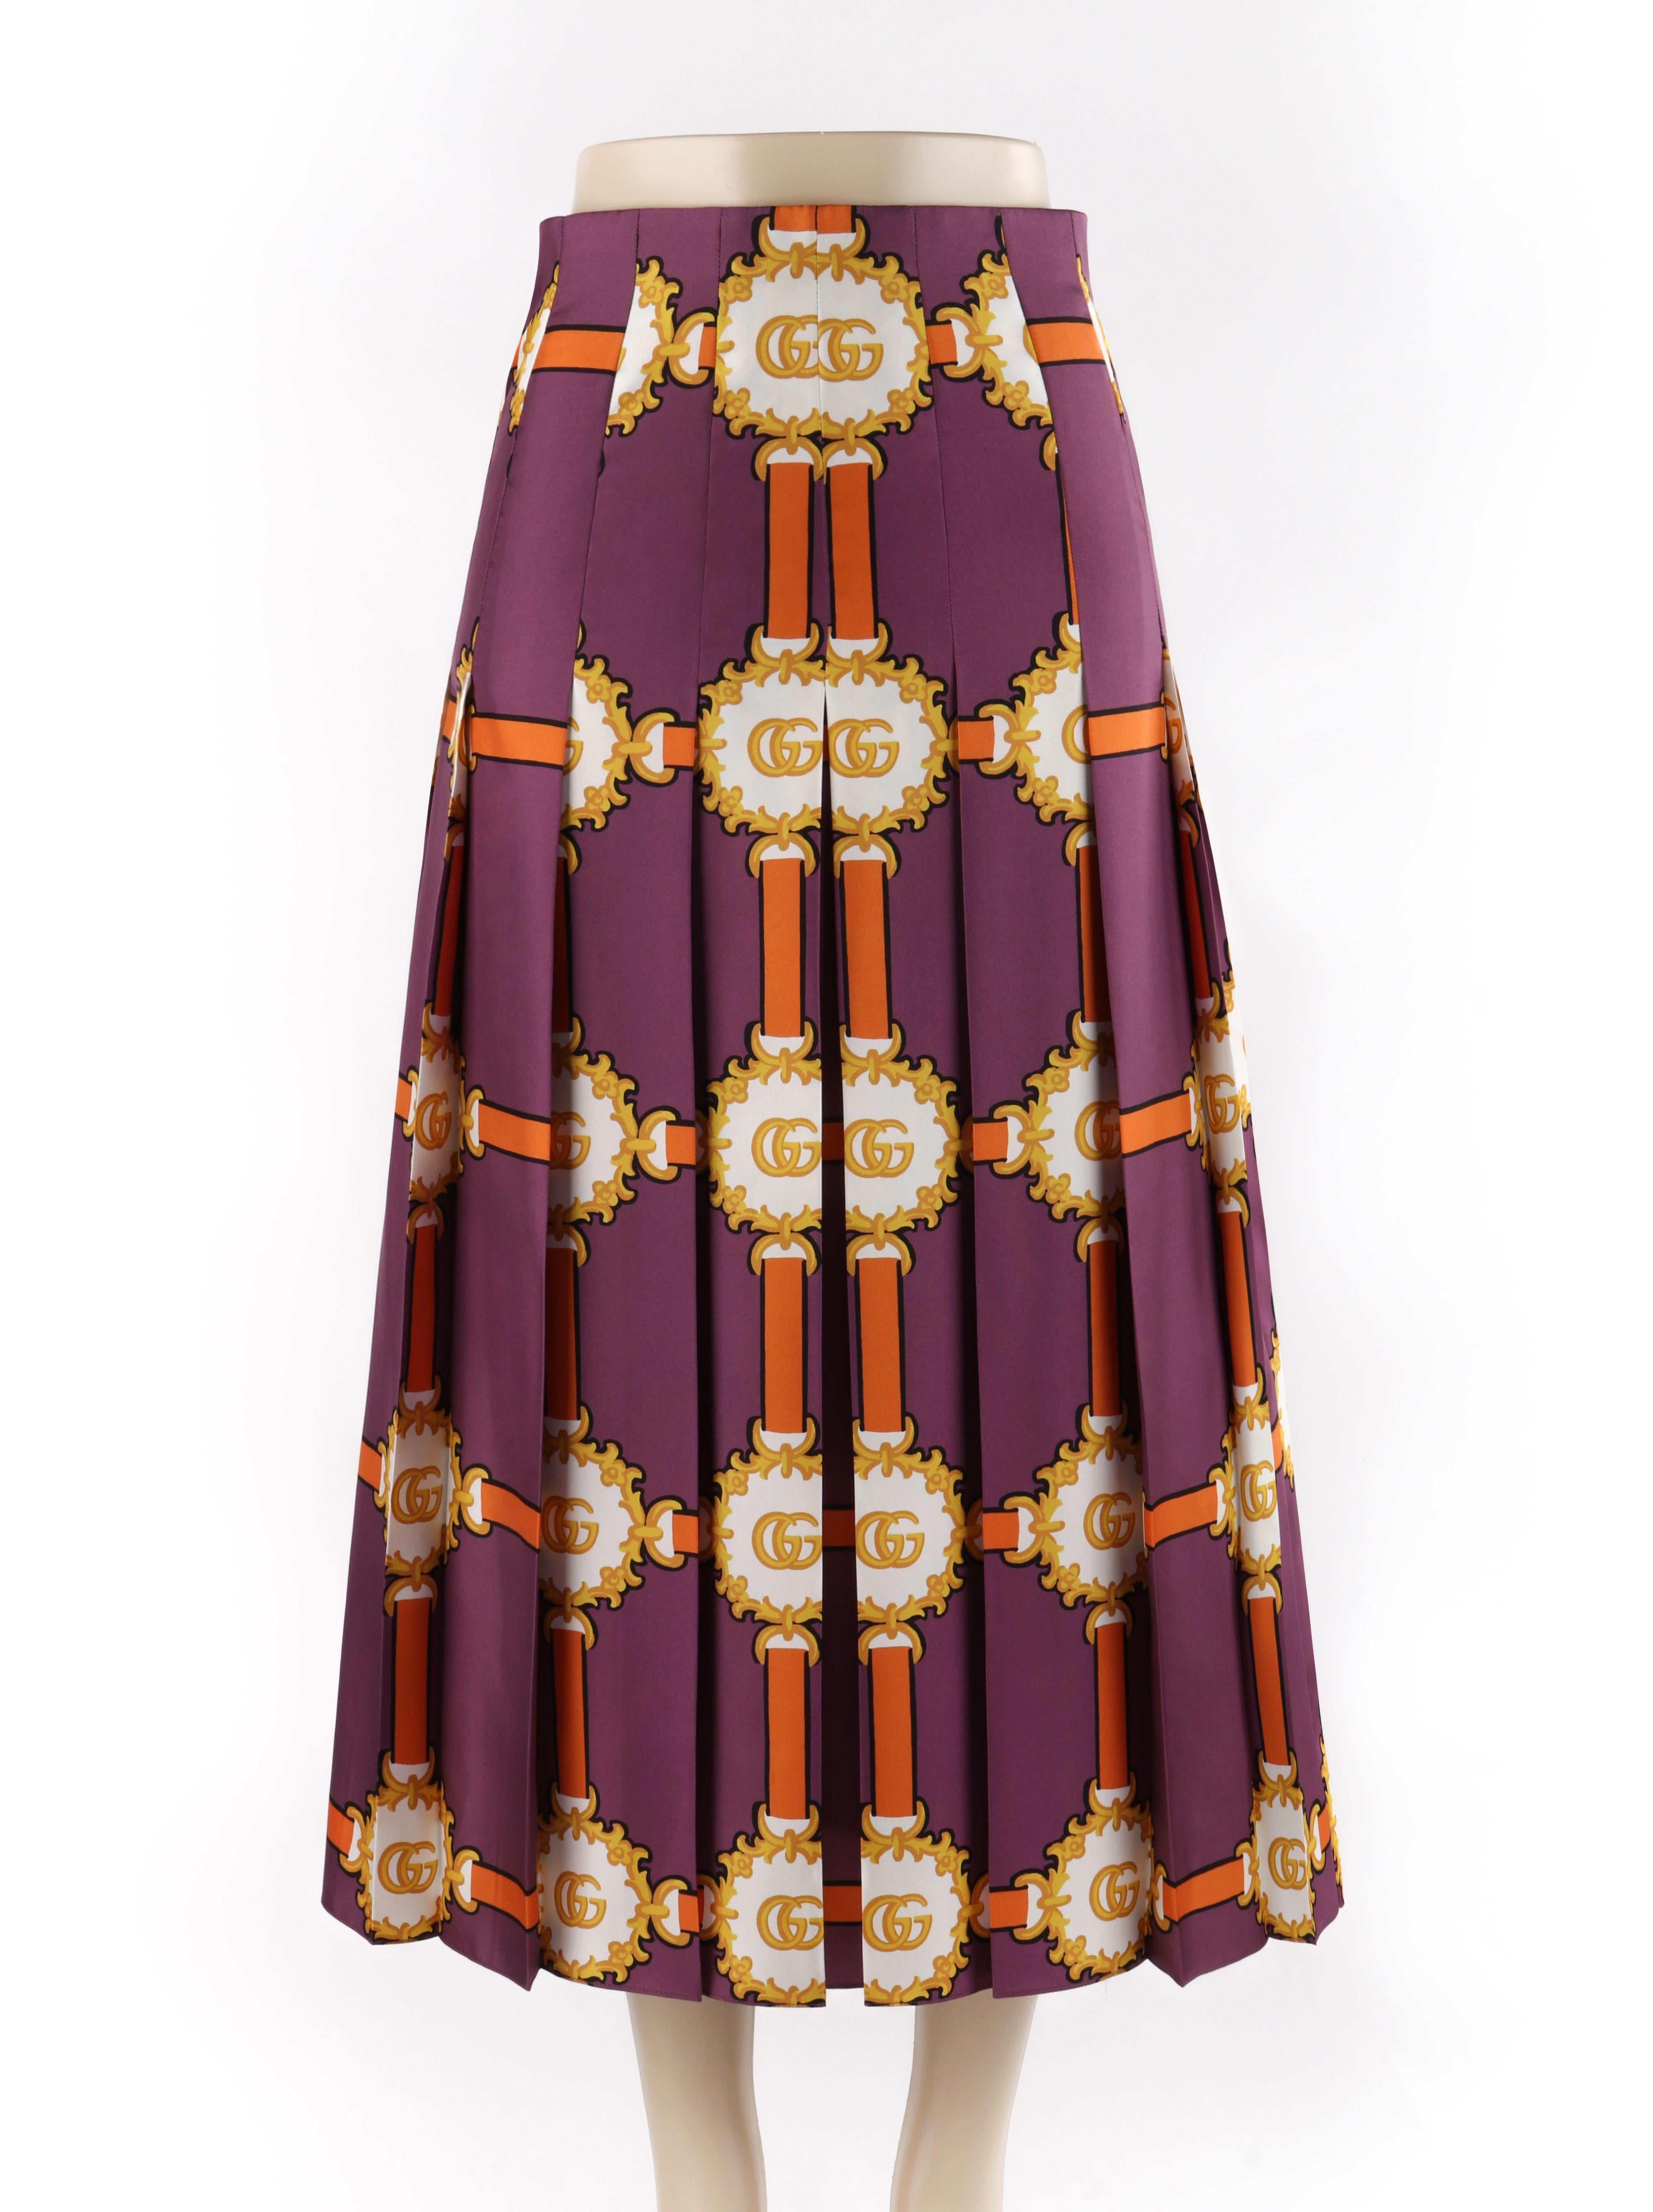 GUCCI c.2019 Purple Gold Marmont GG Doubloon Bridle Harness Silk Pleated Skirt
 
Brand / Manufacturer: Gucci
Circa: 2019 
Designer: Alessandro Michele
Style: Pleated maxi skirt
Color(s): Shades of purple, gold, orange, white
Lined: No
Marked Fabric